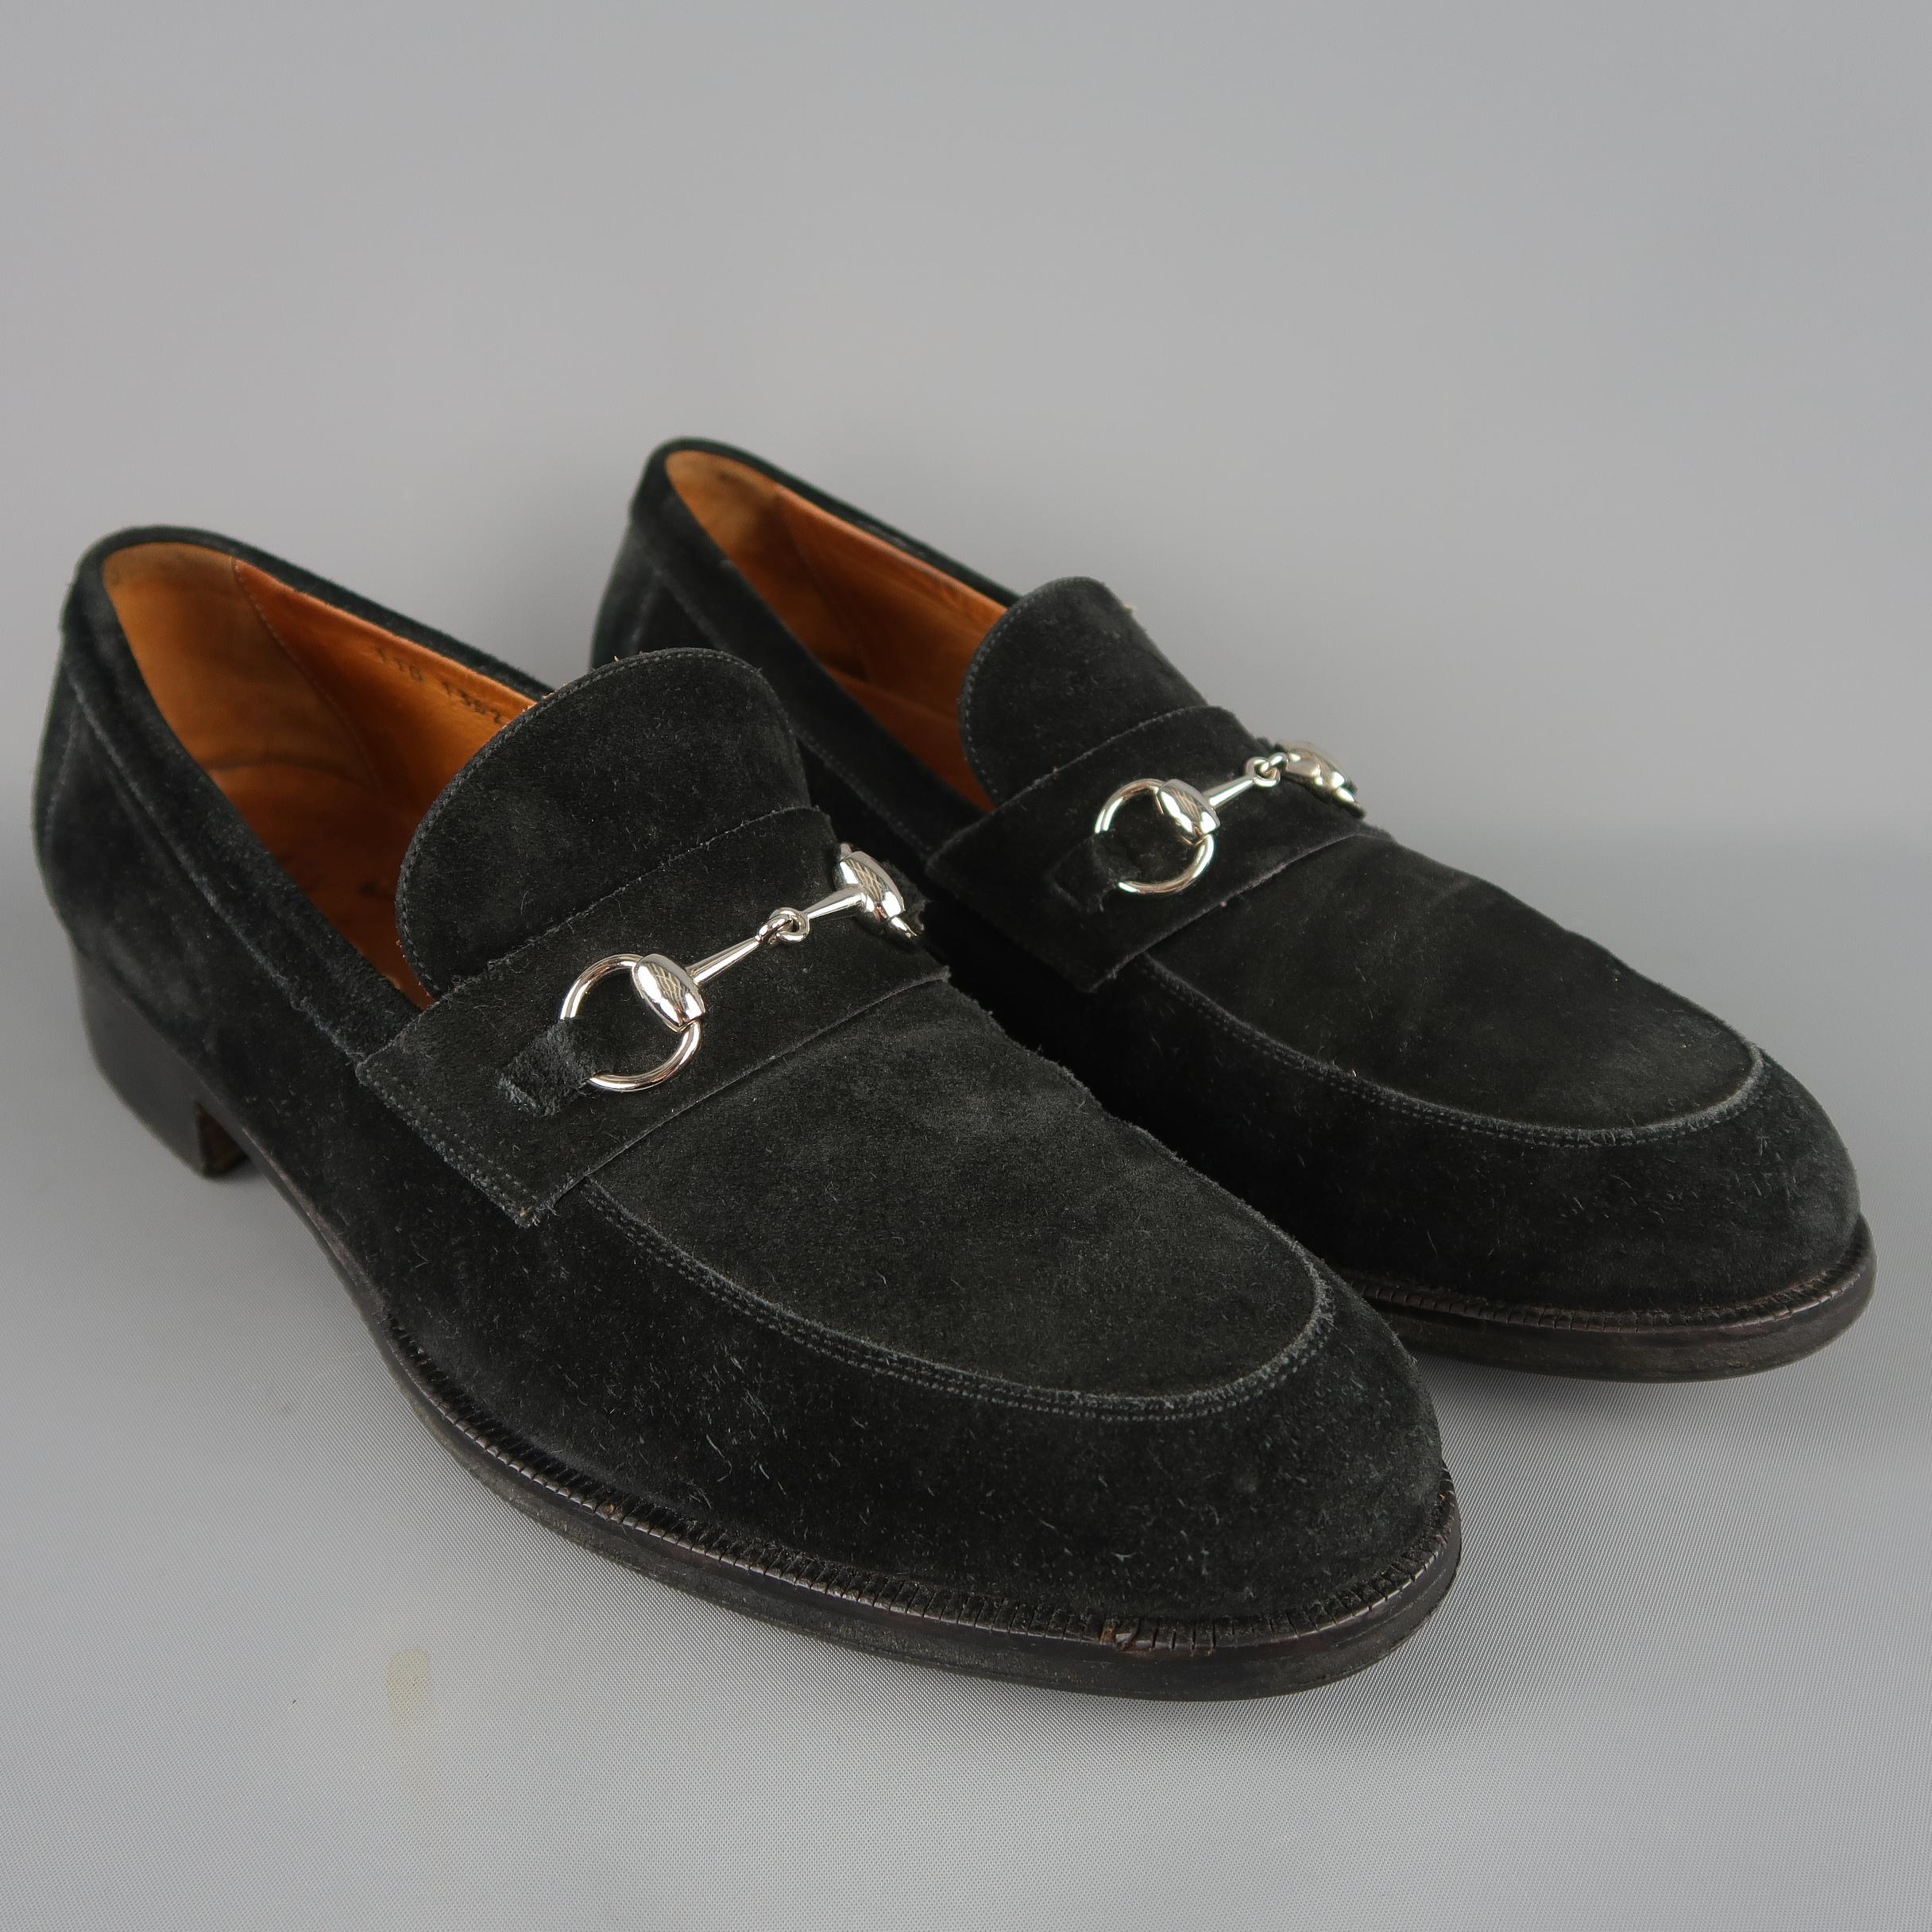 Vintage Gucci loafers come in black suede with a silver tone horsebit. Wear throughout. As-is. Made in Italy.
 
Fair Pre-Owned Condition.
Marked: 12 D